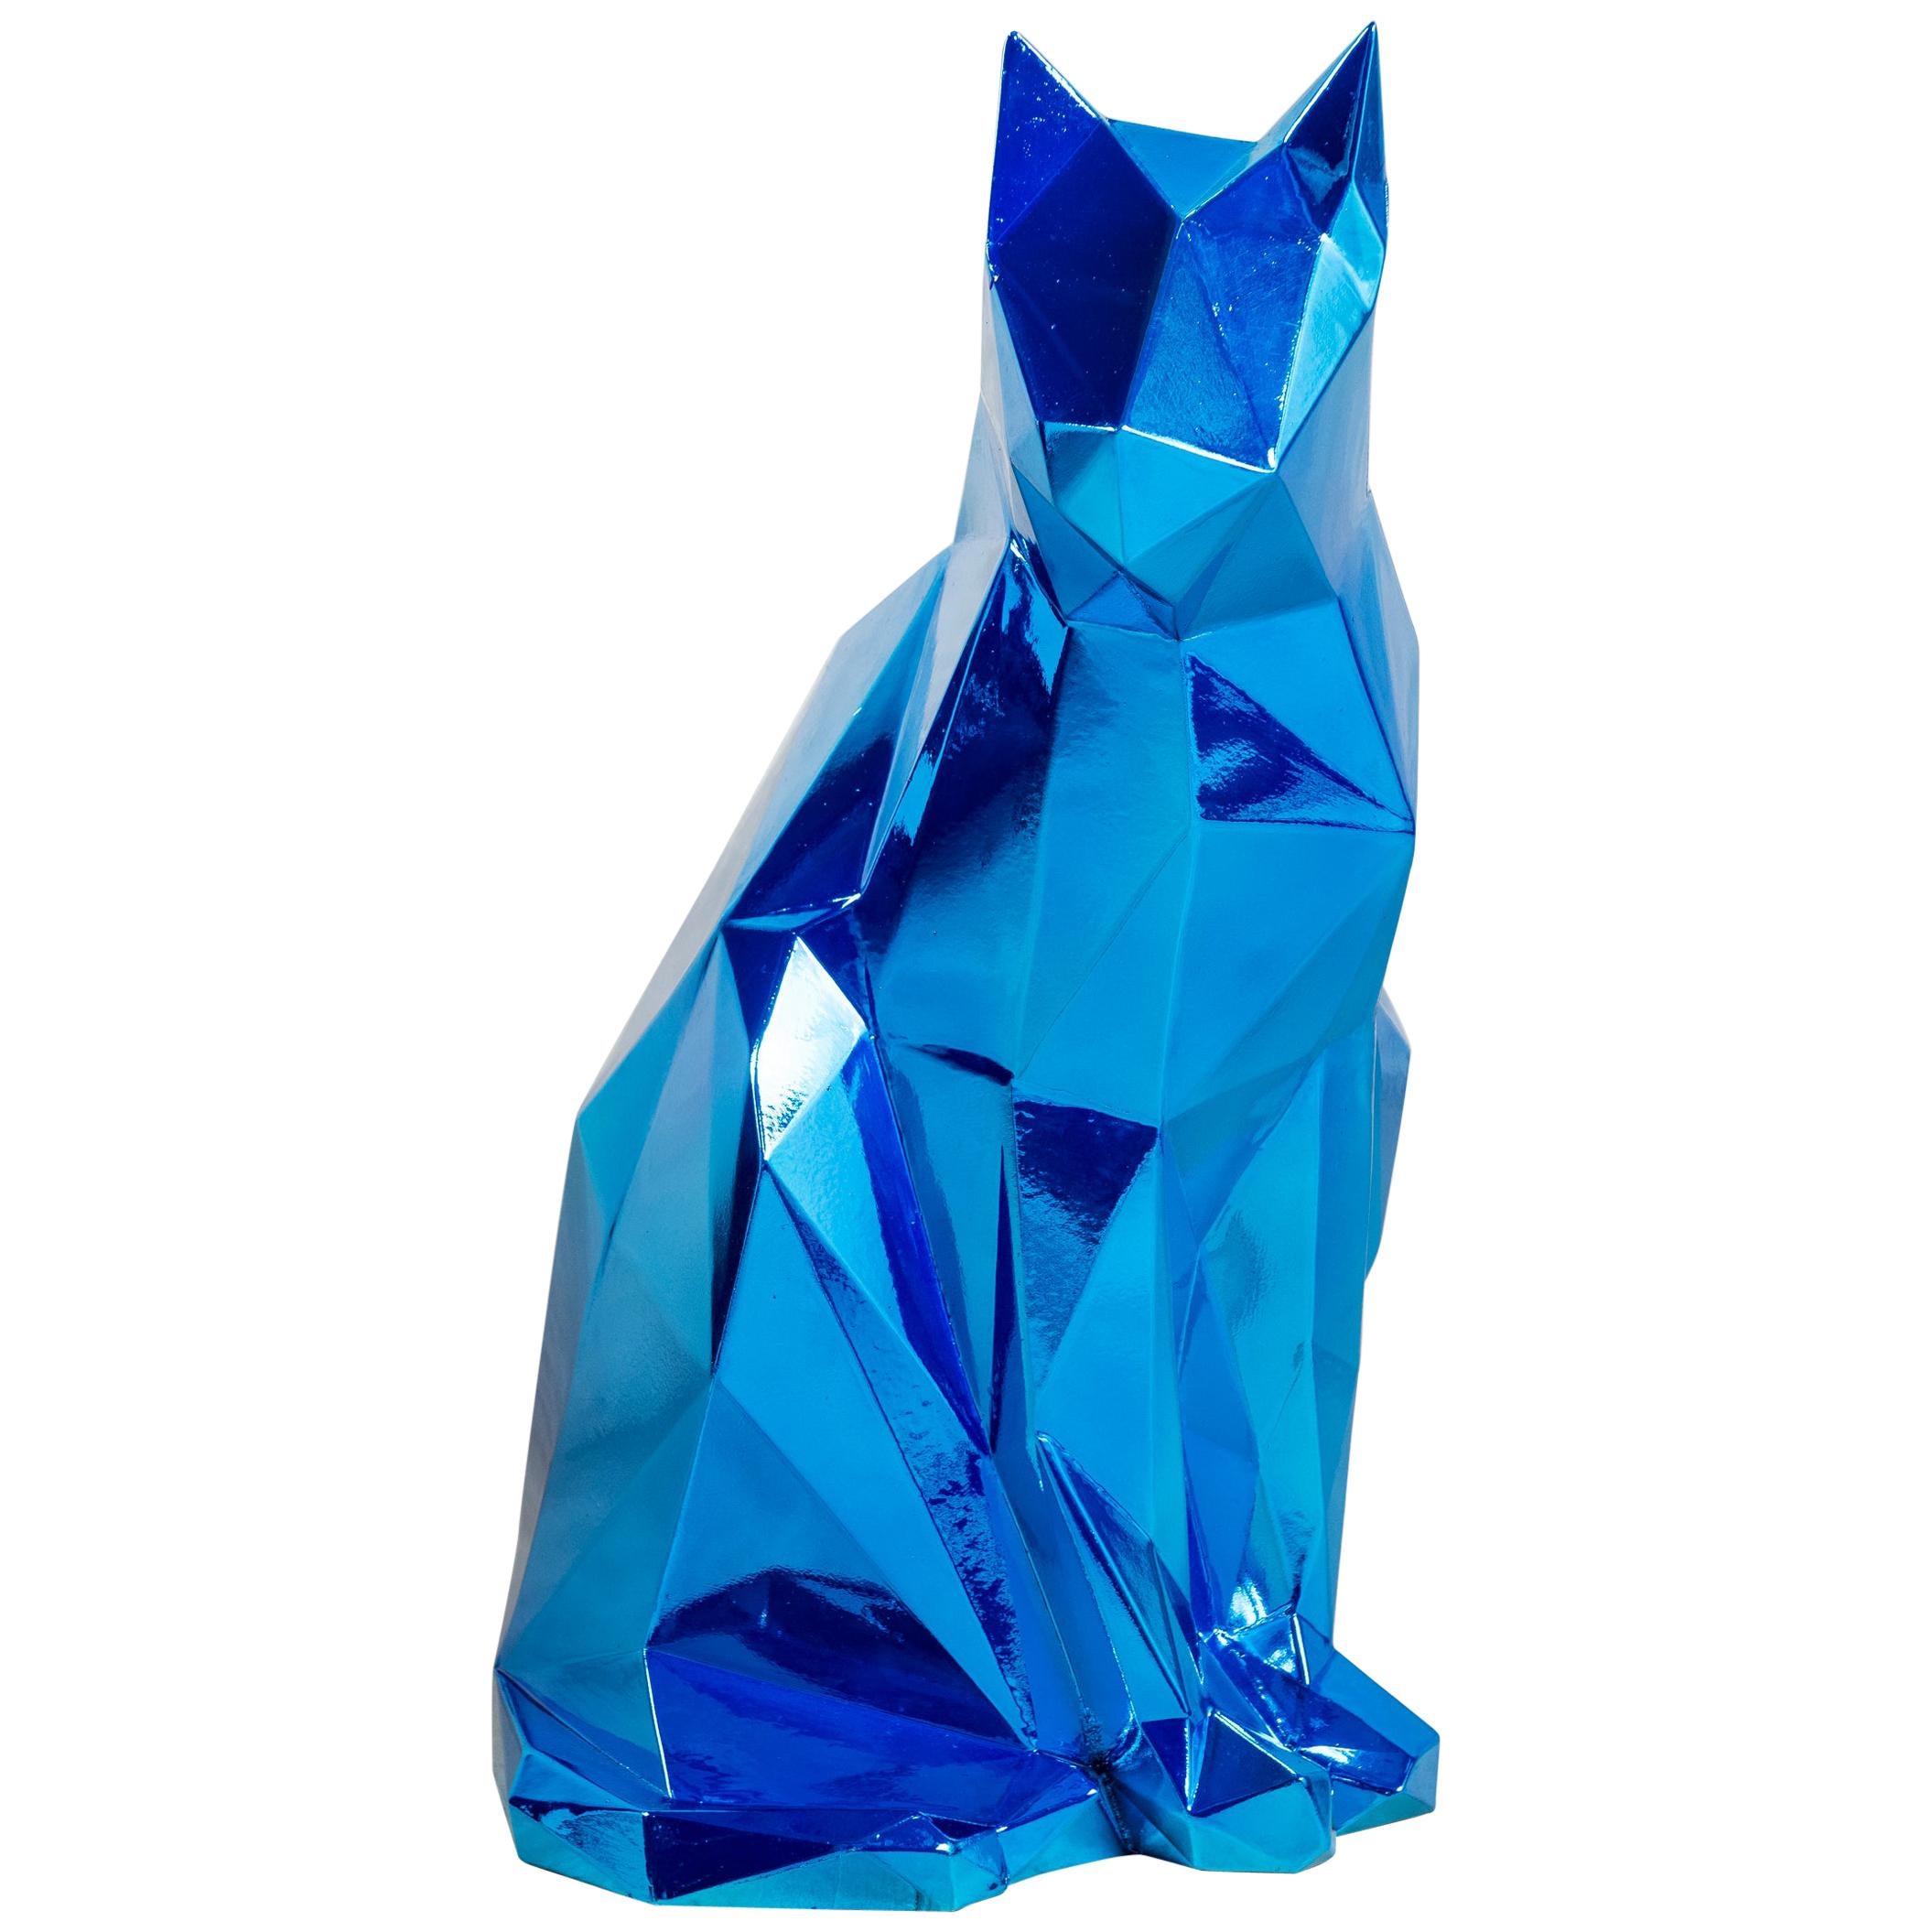 Plastic Cat by Mariano Giraud, Argentinian Contemporary Artist